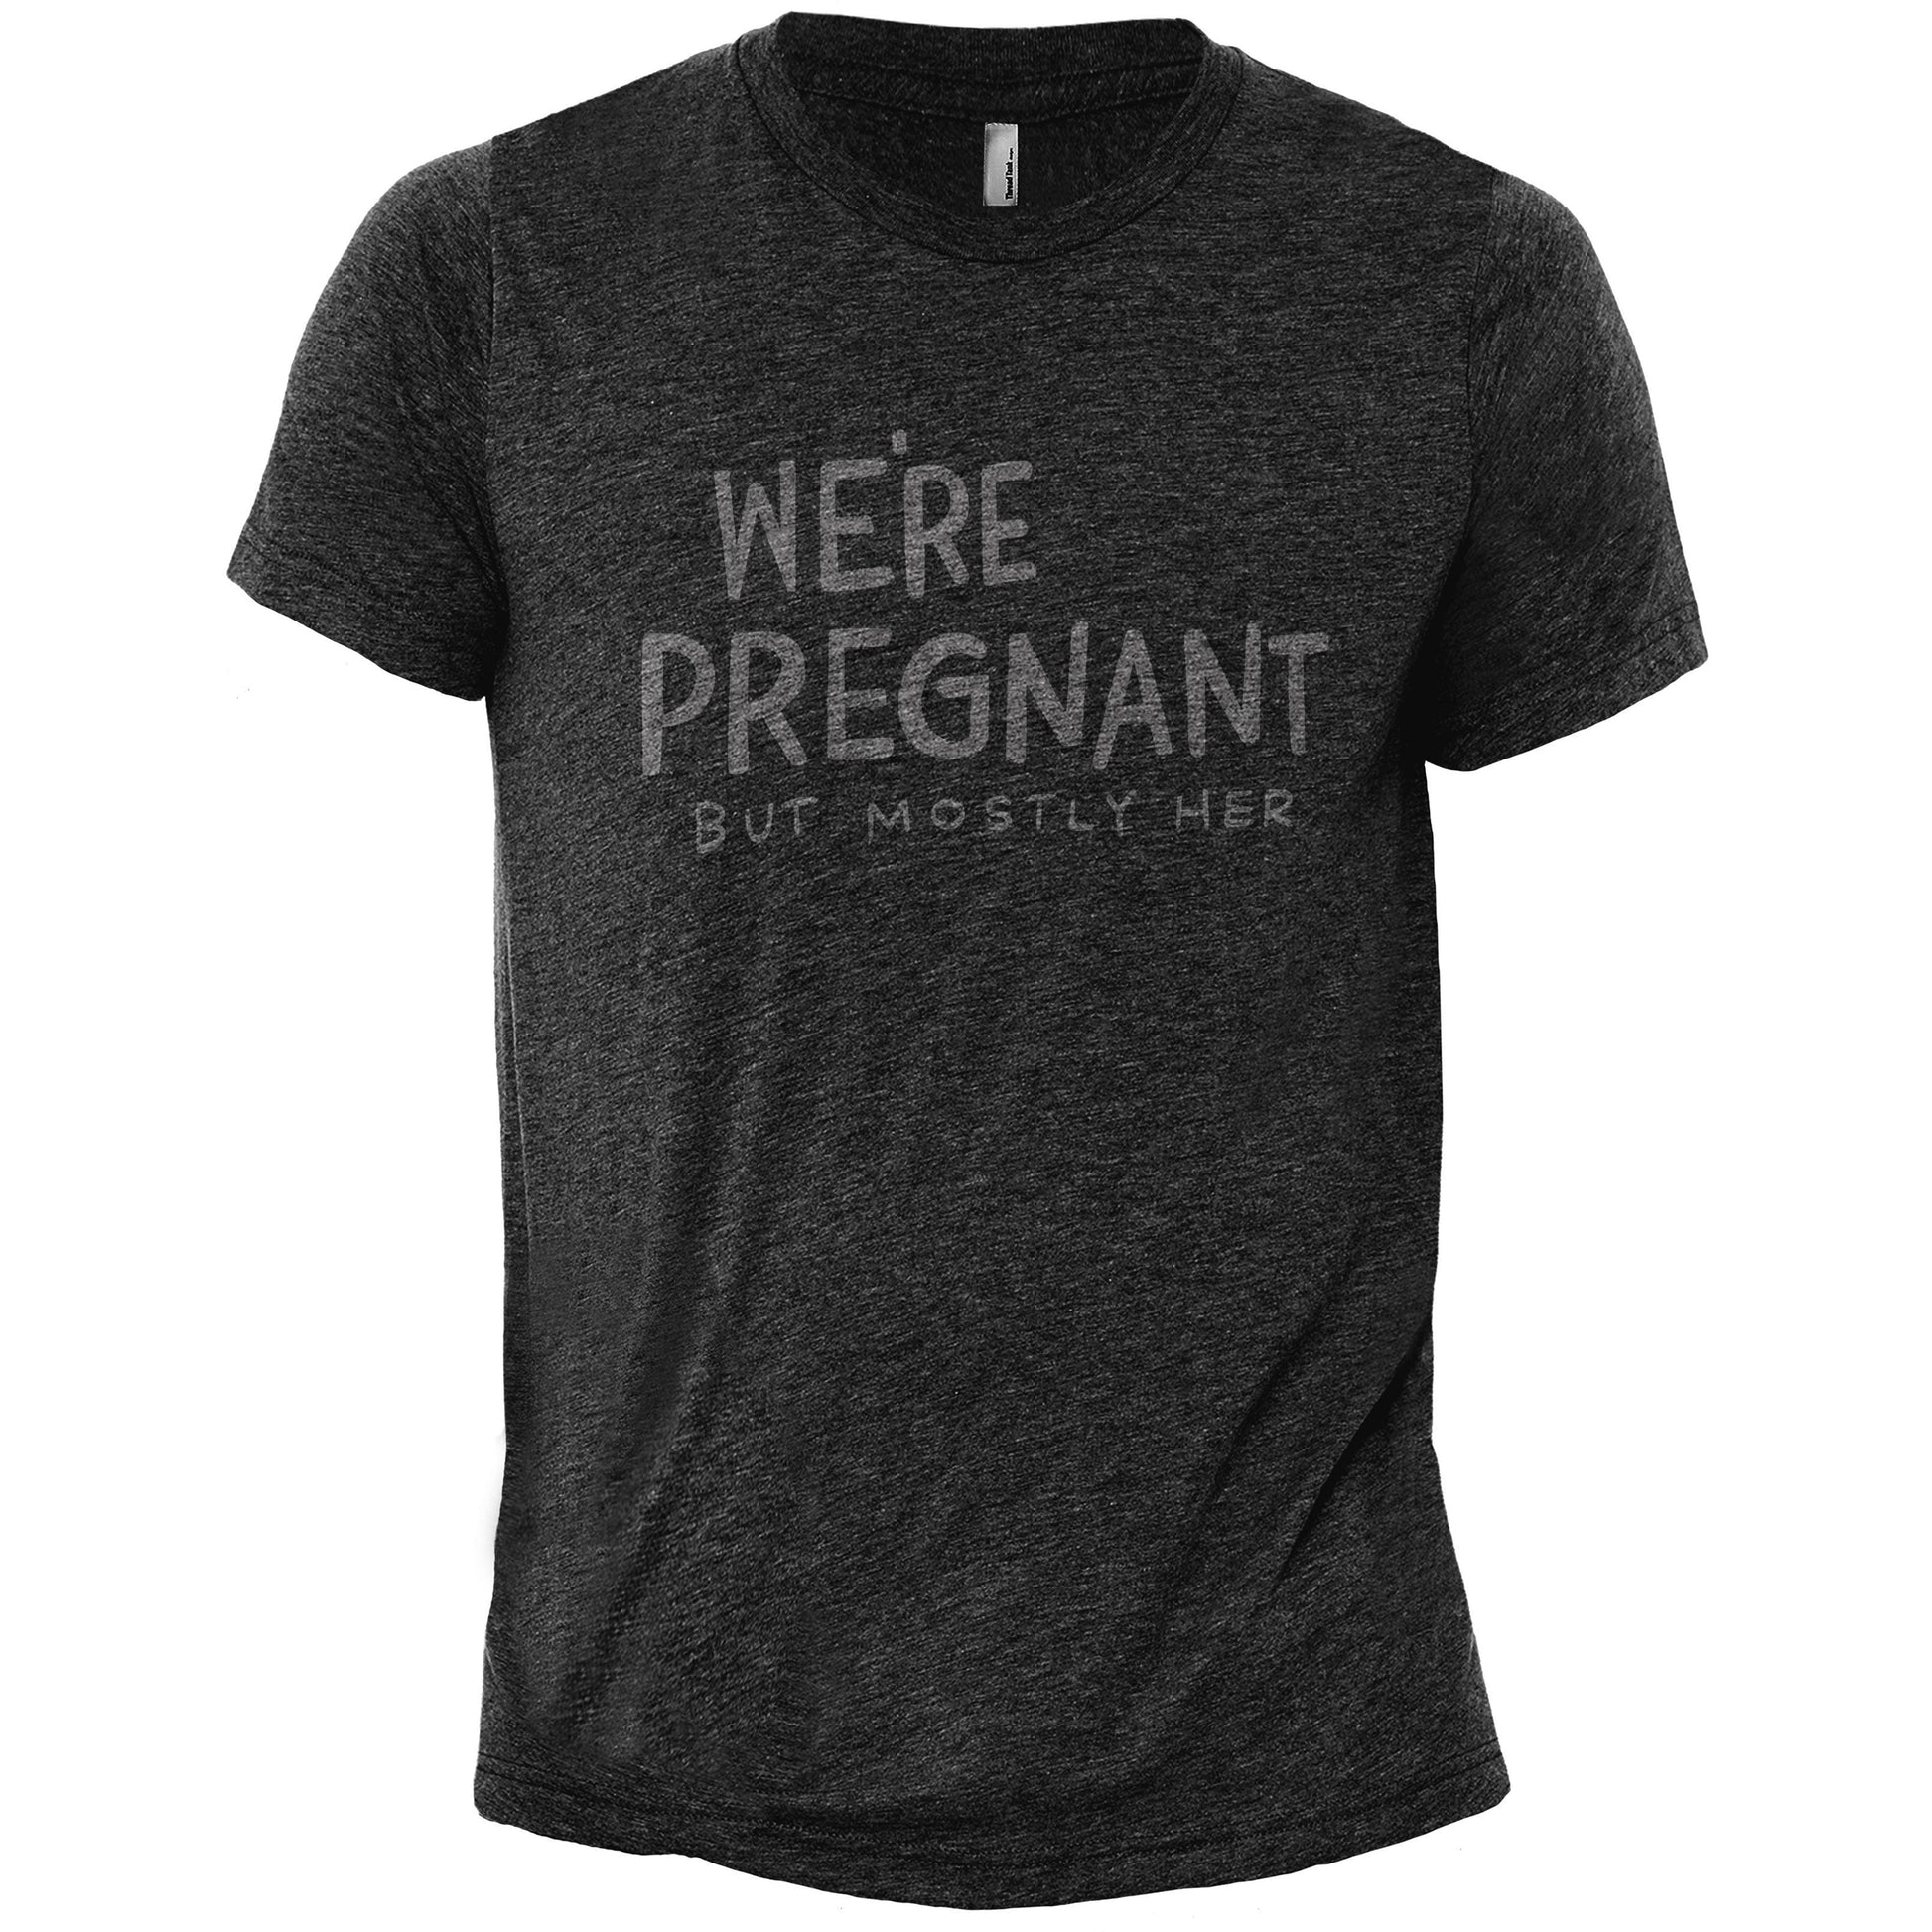 We're Pregnant But Mostly Her - Stories You Can Wear by Thread Tank